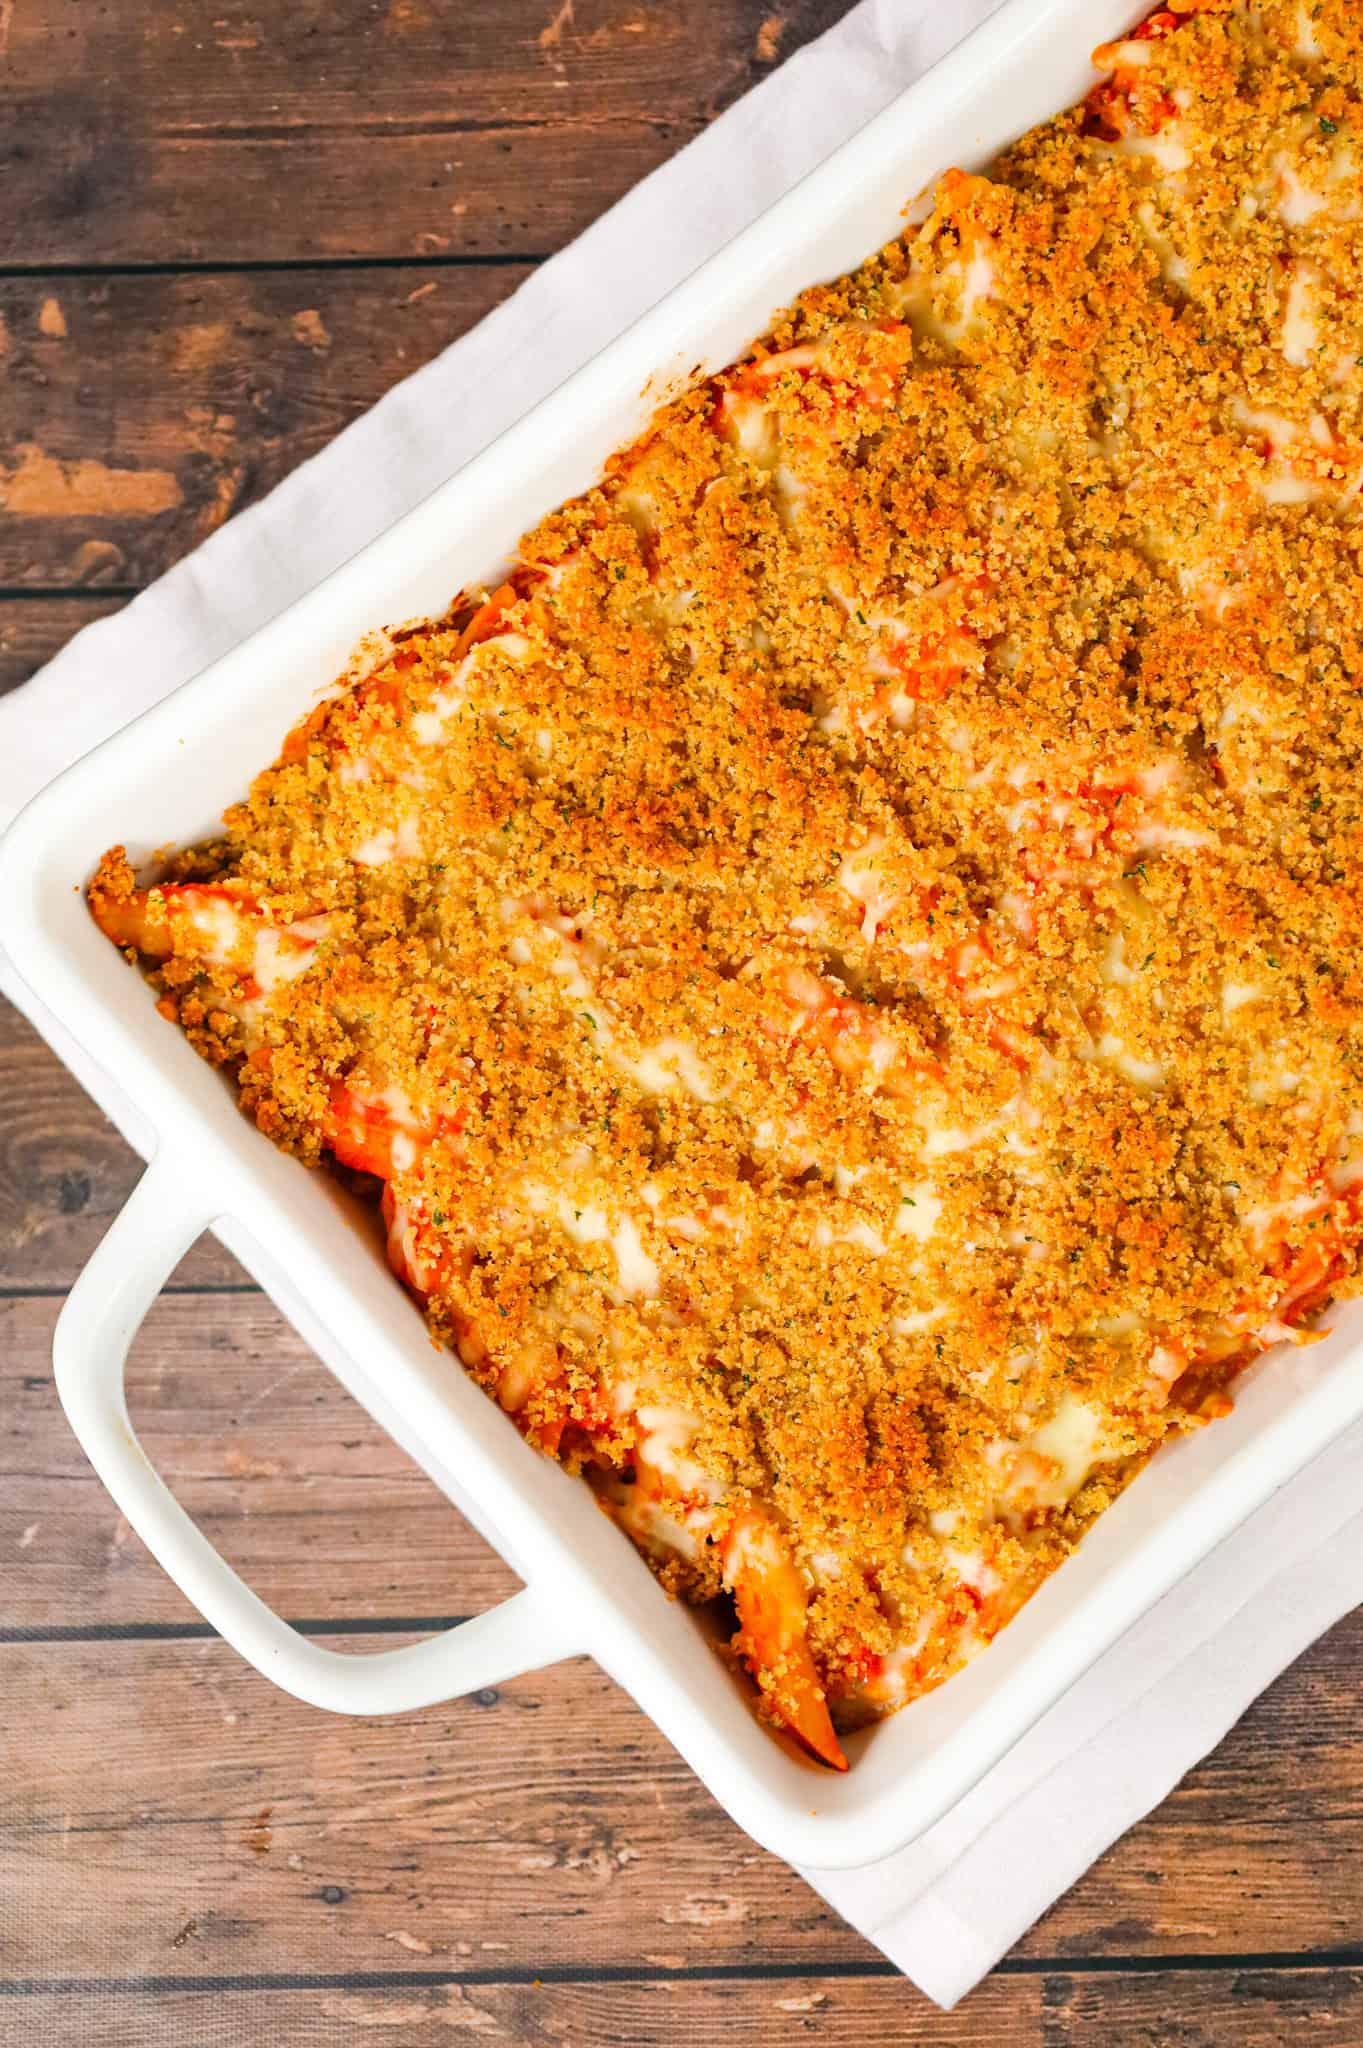 Chicken Parmesan Pasta is an easy baked pasta recipe loaded with shredded chicken, marinara sauce, mozzarella, parmesan cheese and topped with Italian seasoned bread crumbs.